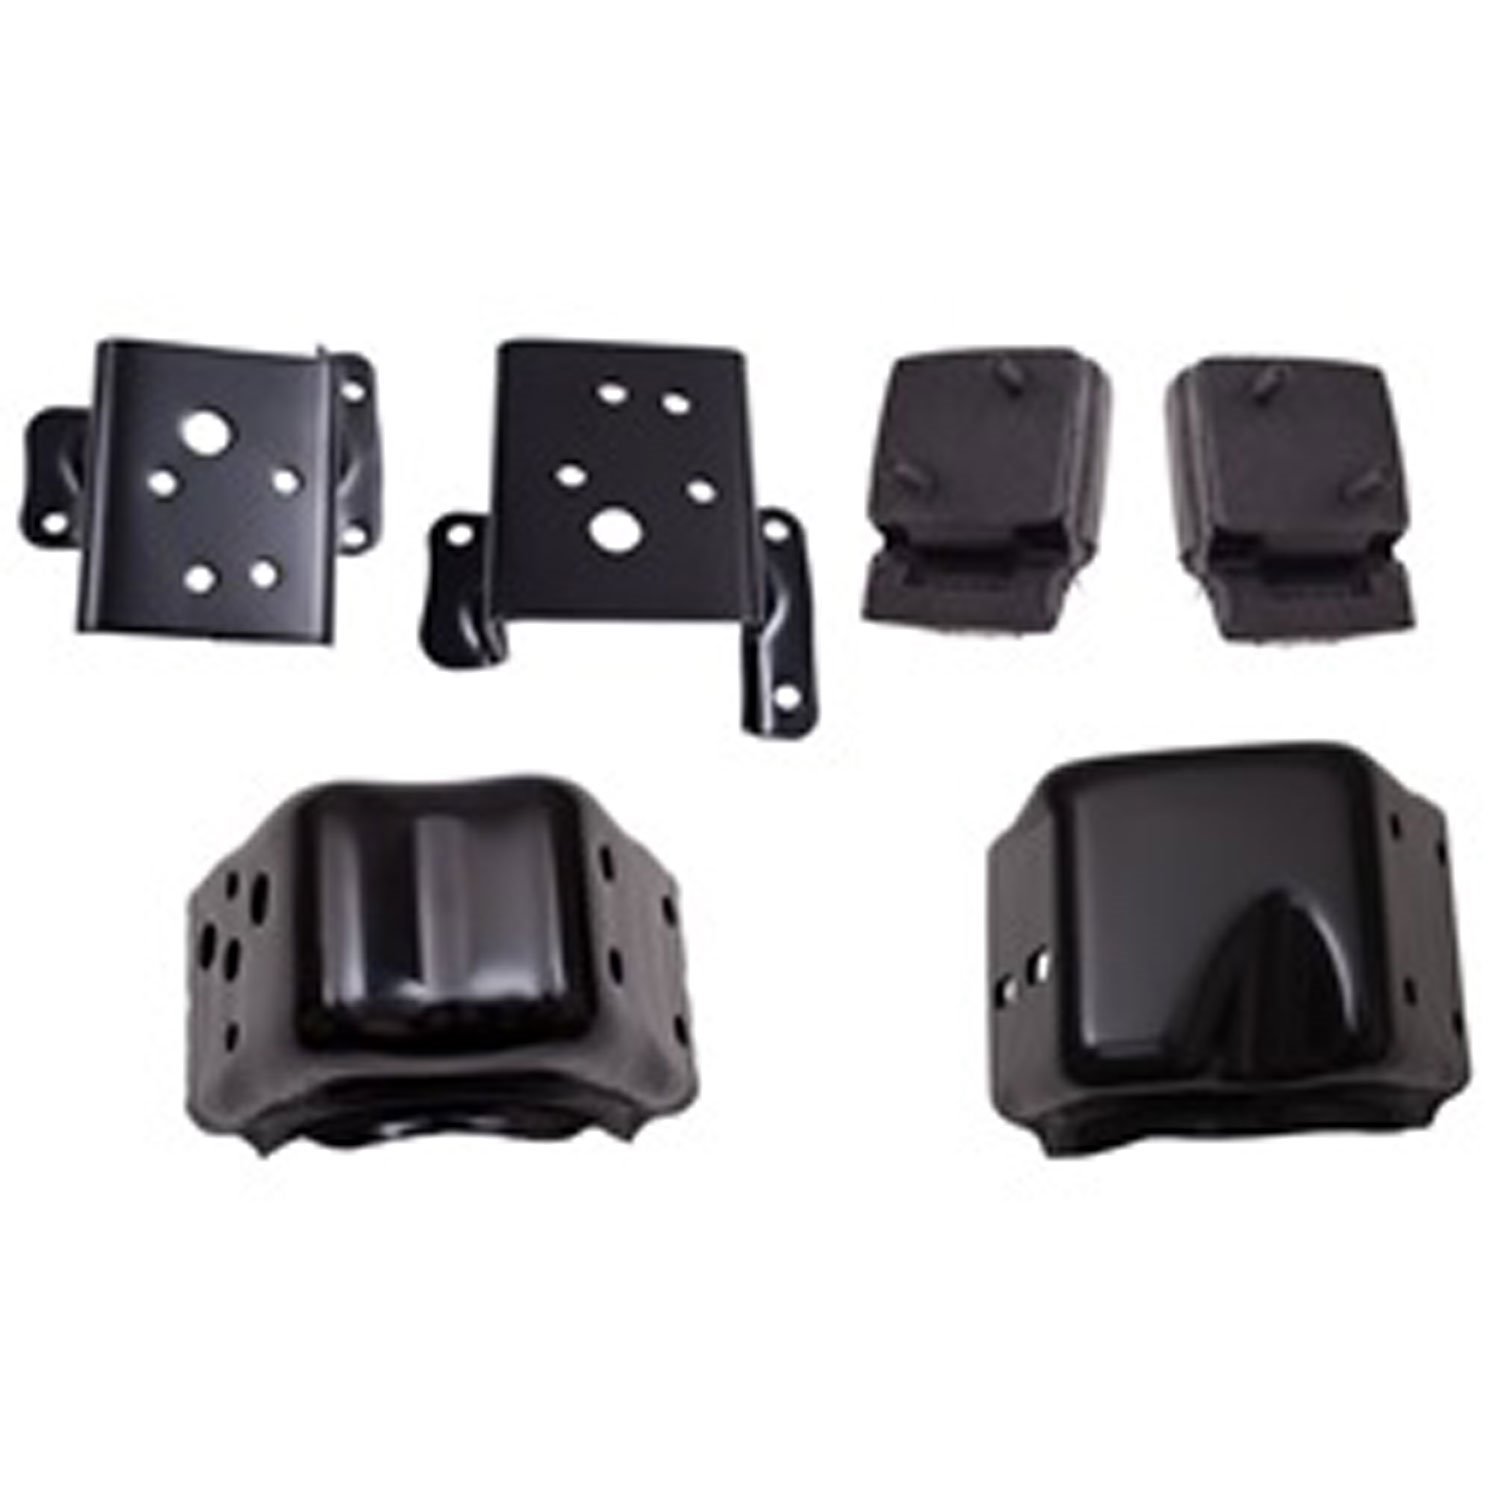 Engine Mounting Kit 5.0L Includes 2 Engine Mounts